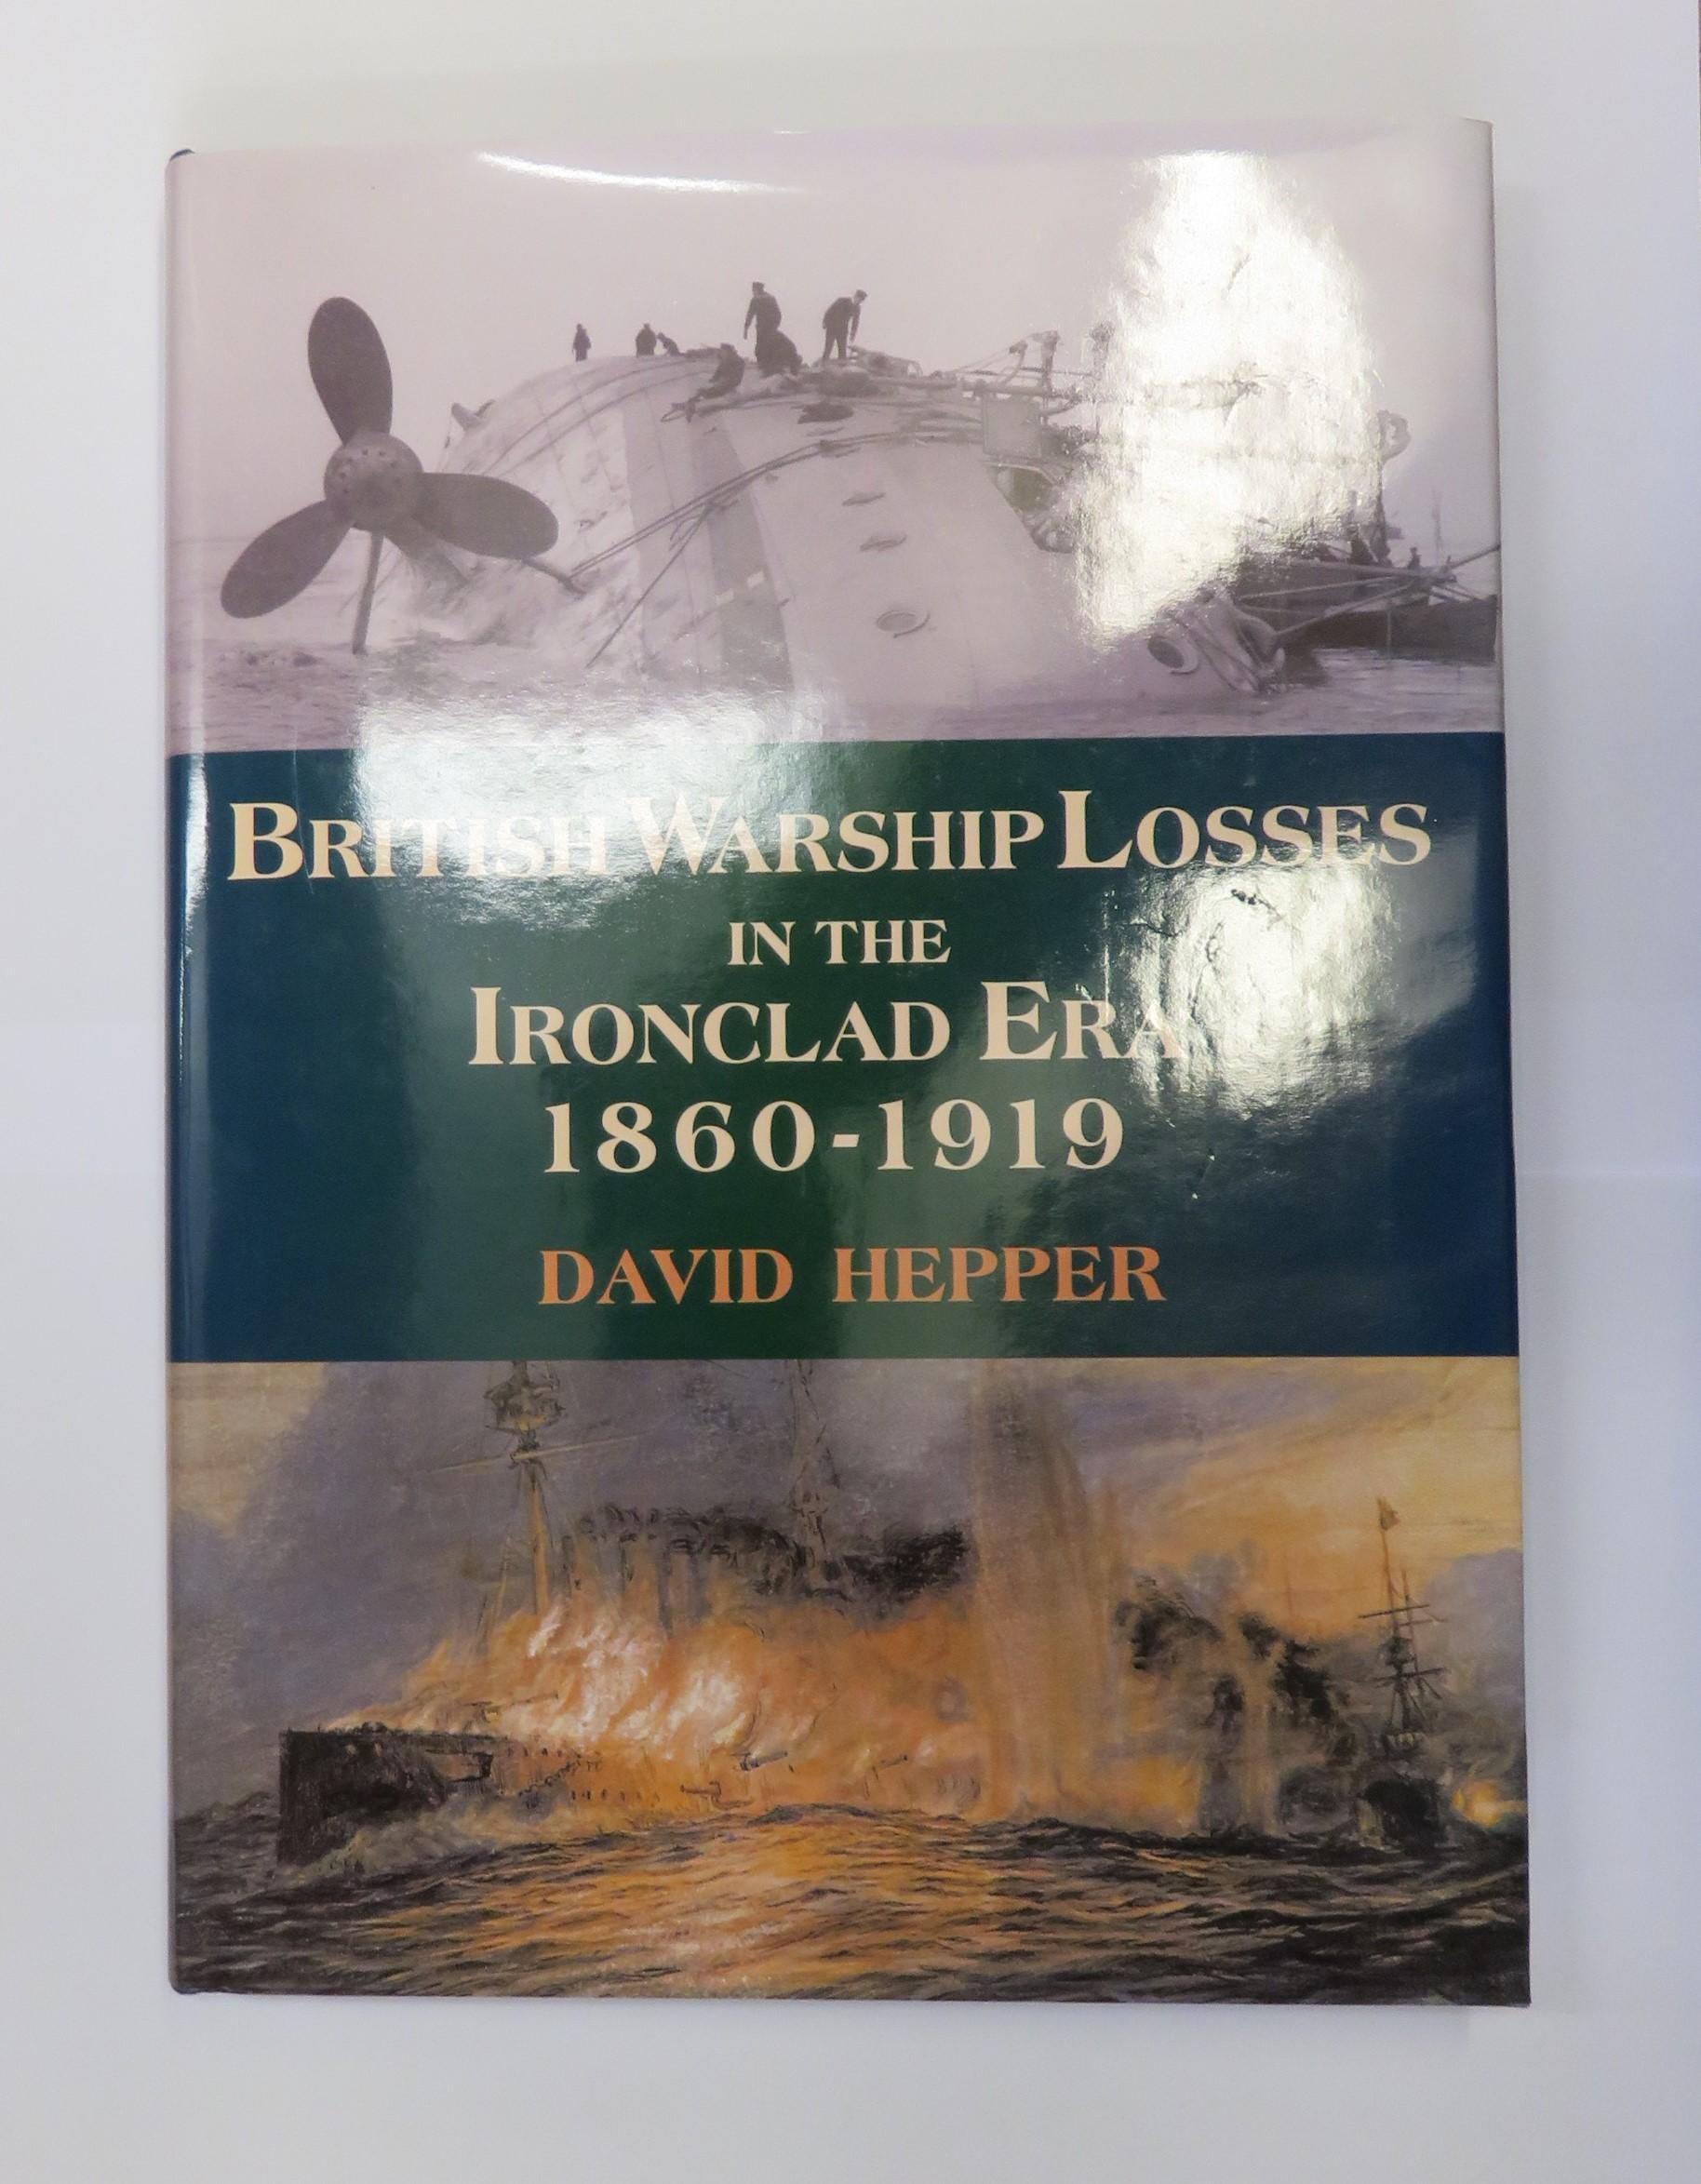 British Warship Losses in the Ironclad Era 1860-1919 by David Hepper ...